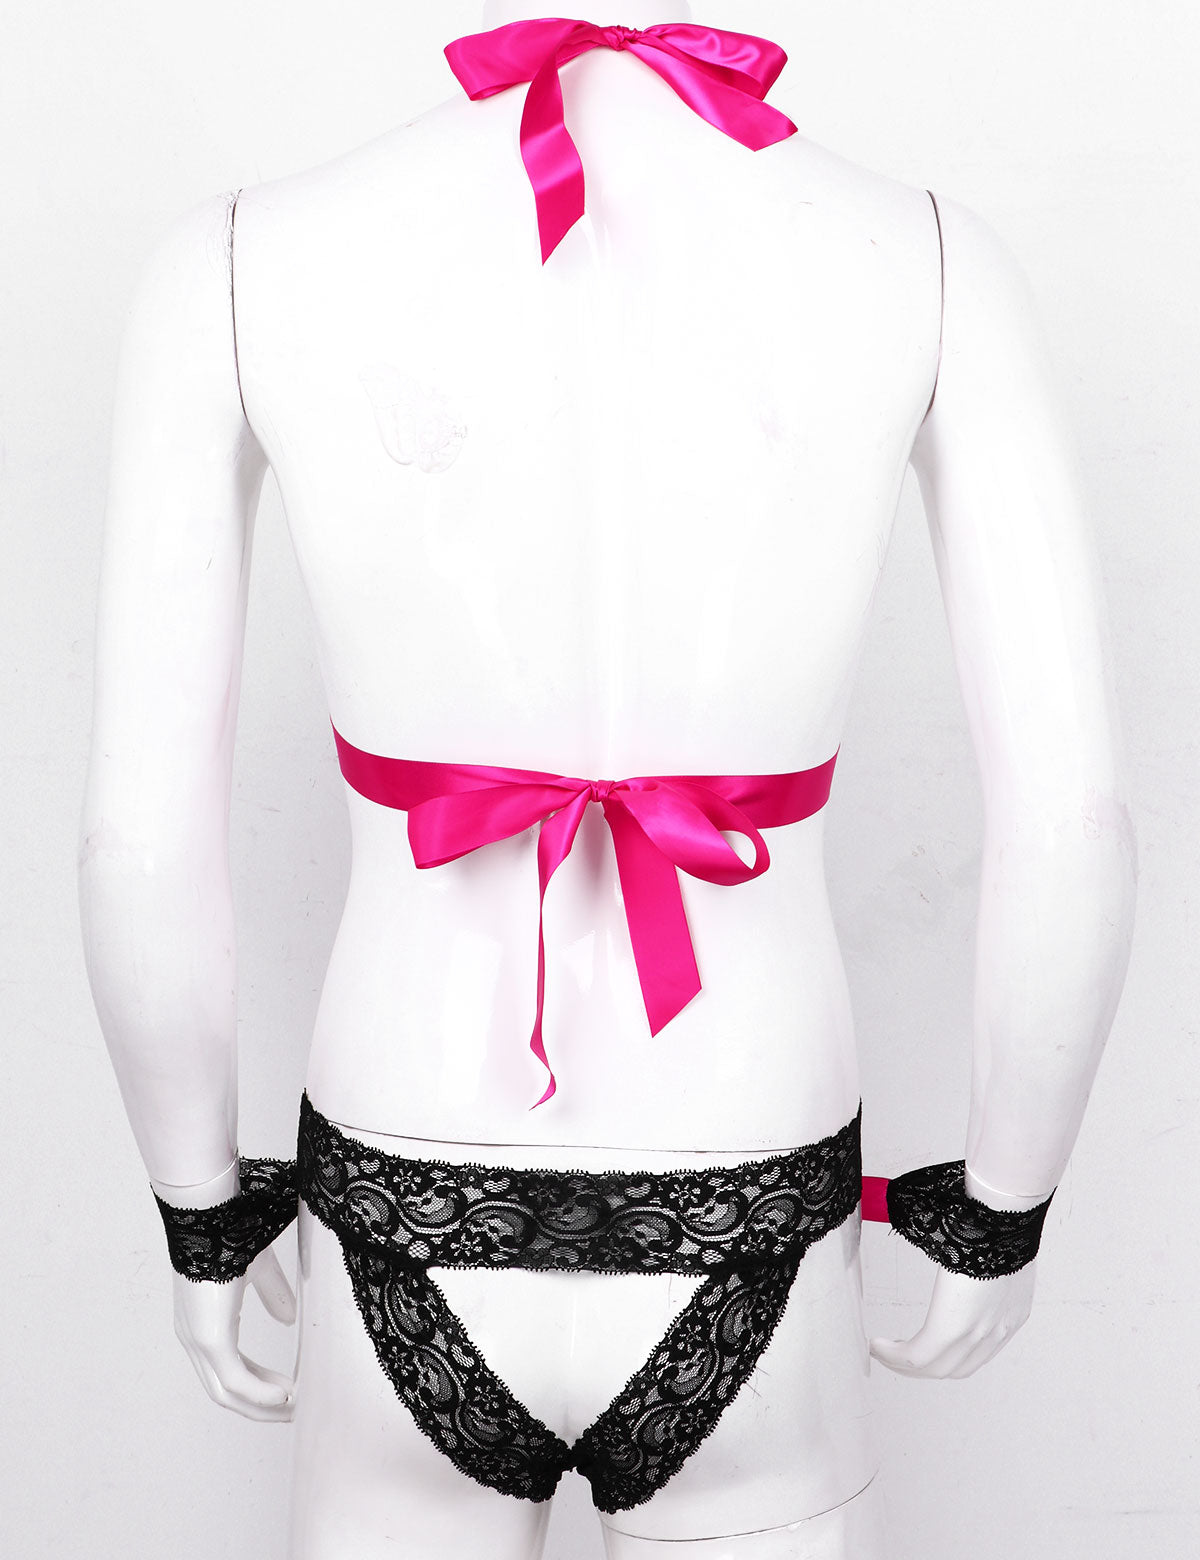 Sissy Bodysuit Lingerie: Sexy and Open for Crossdressers